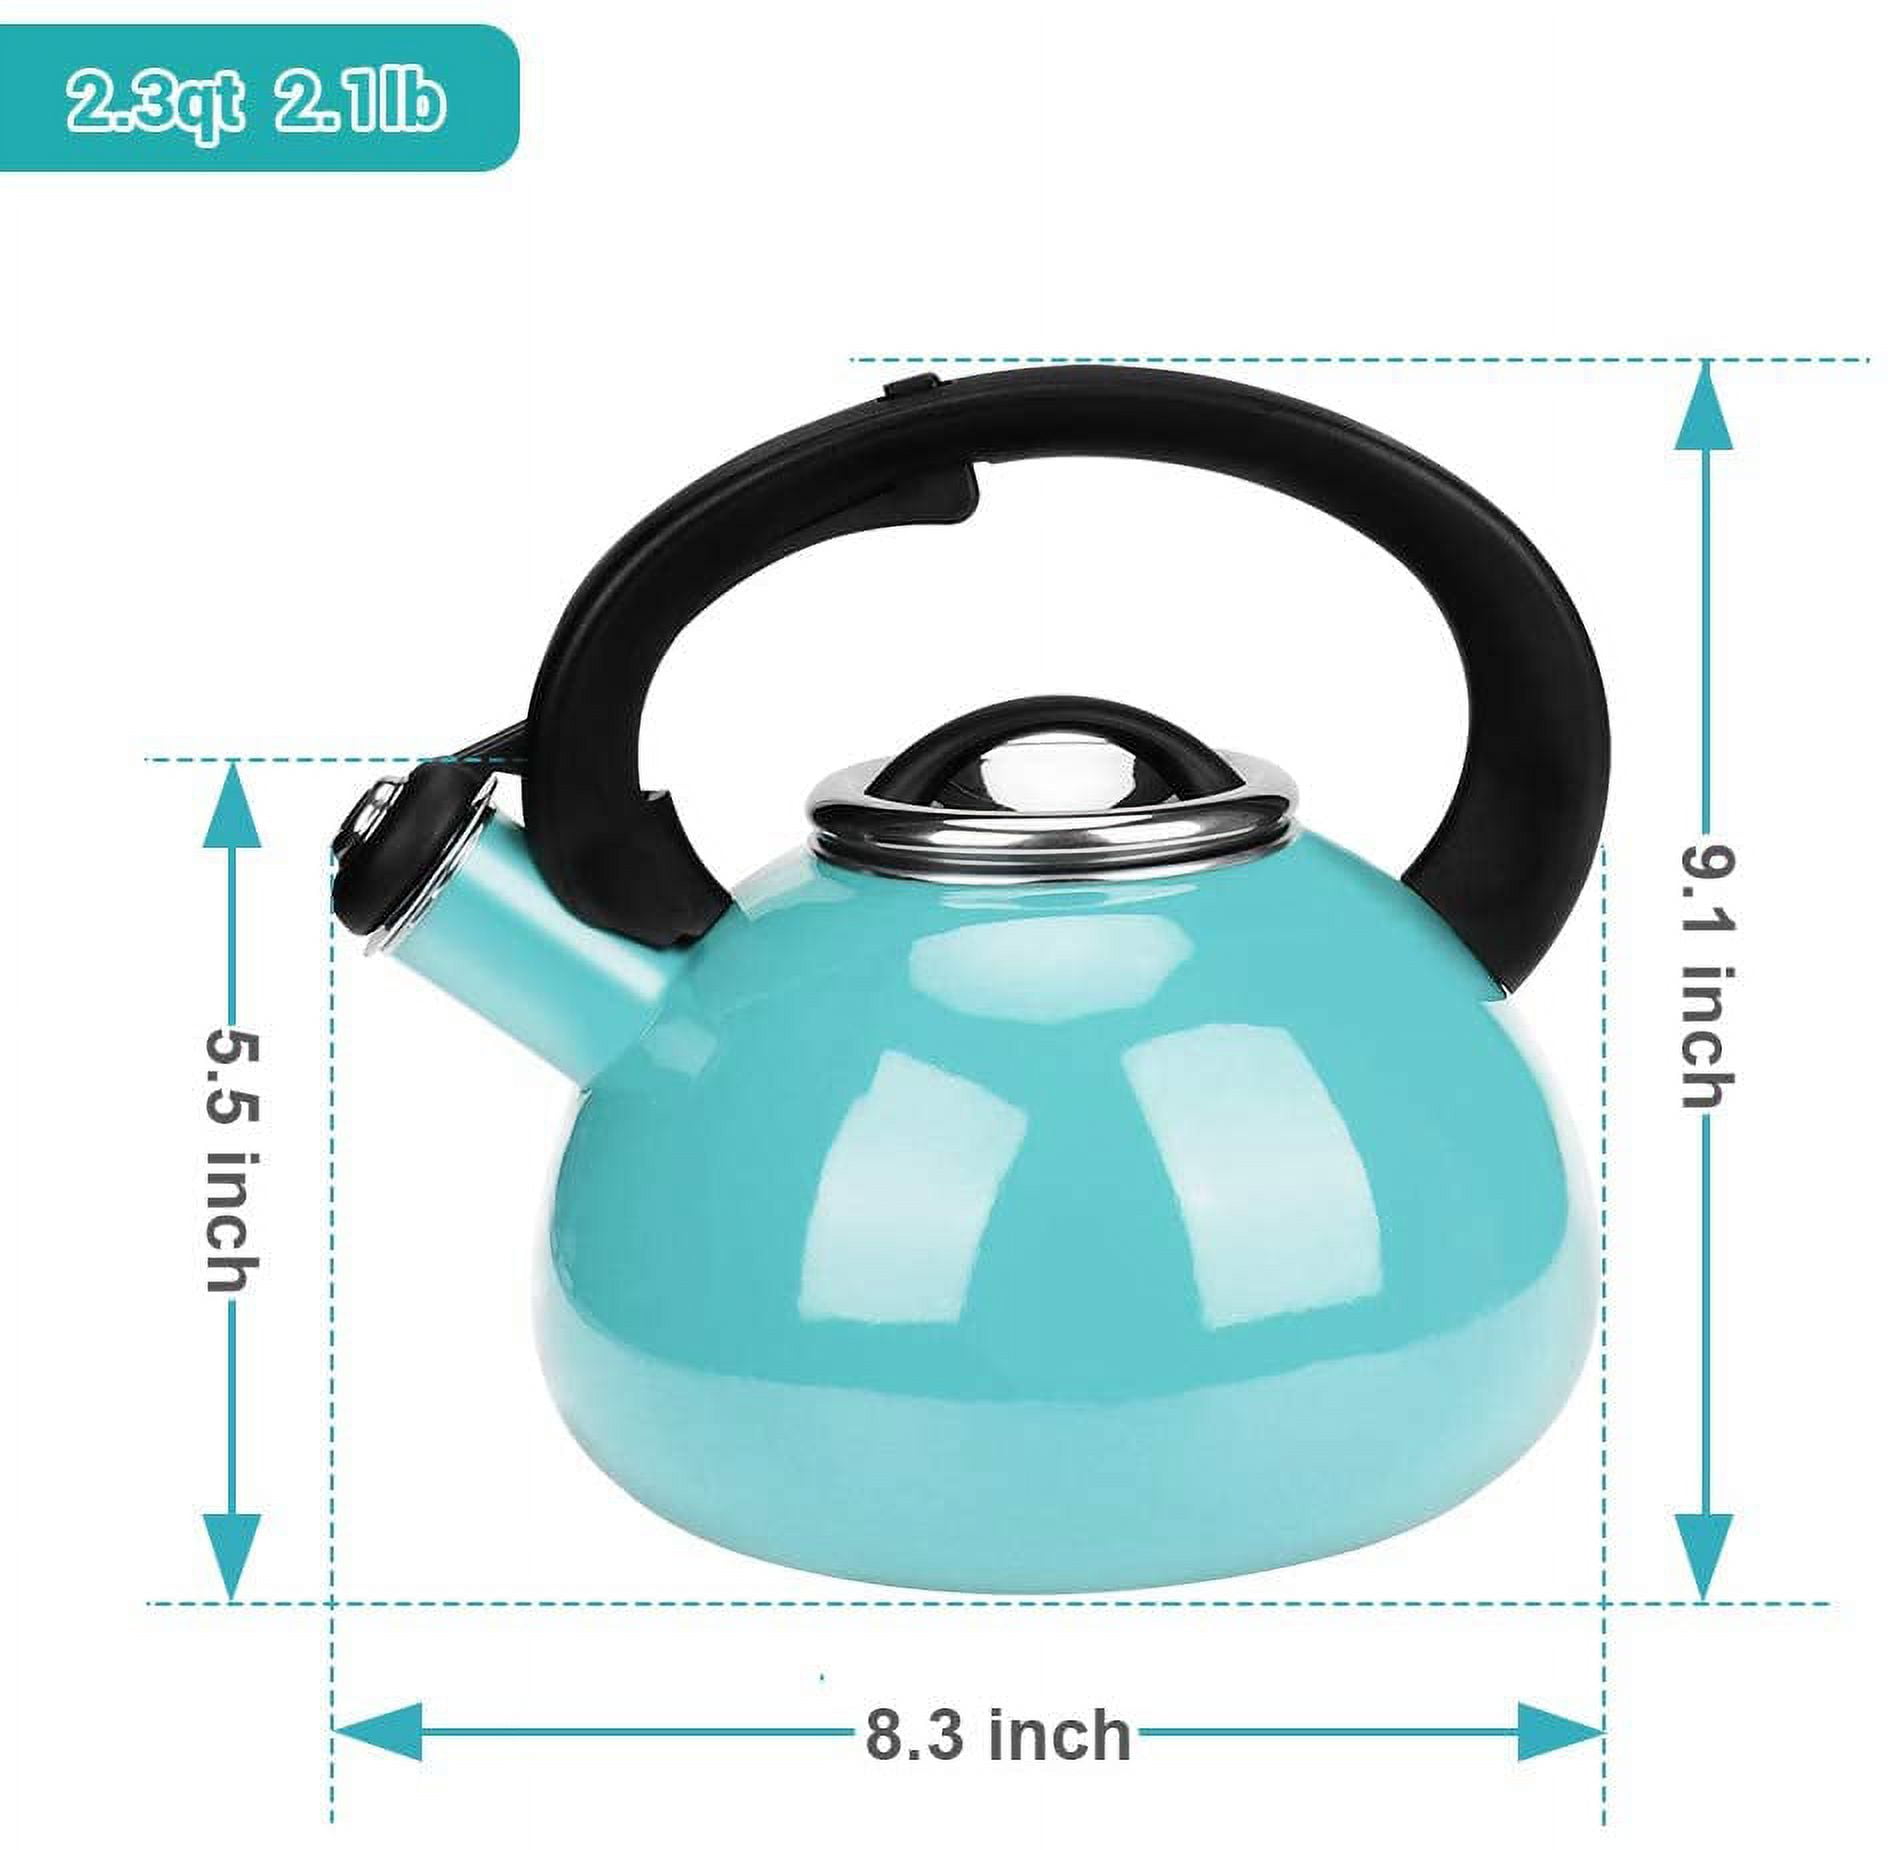 AIDEA 2.3 Quarts Stainless Steel Whistling Stovetop Tea Kettle